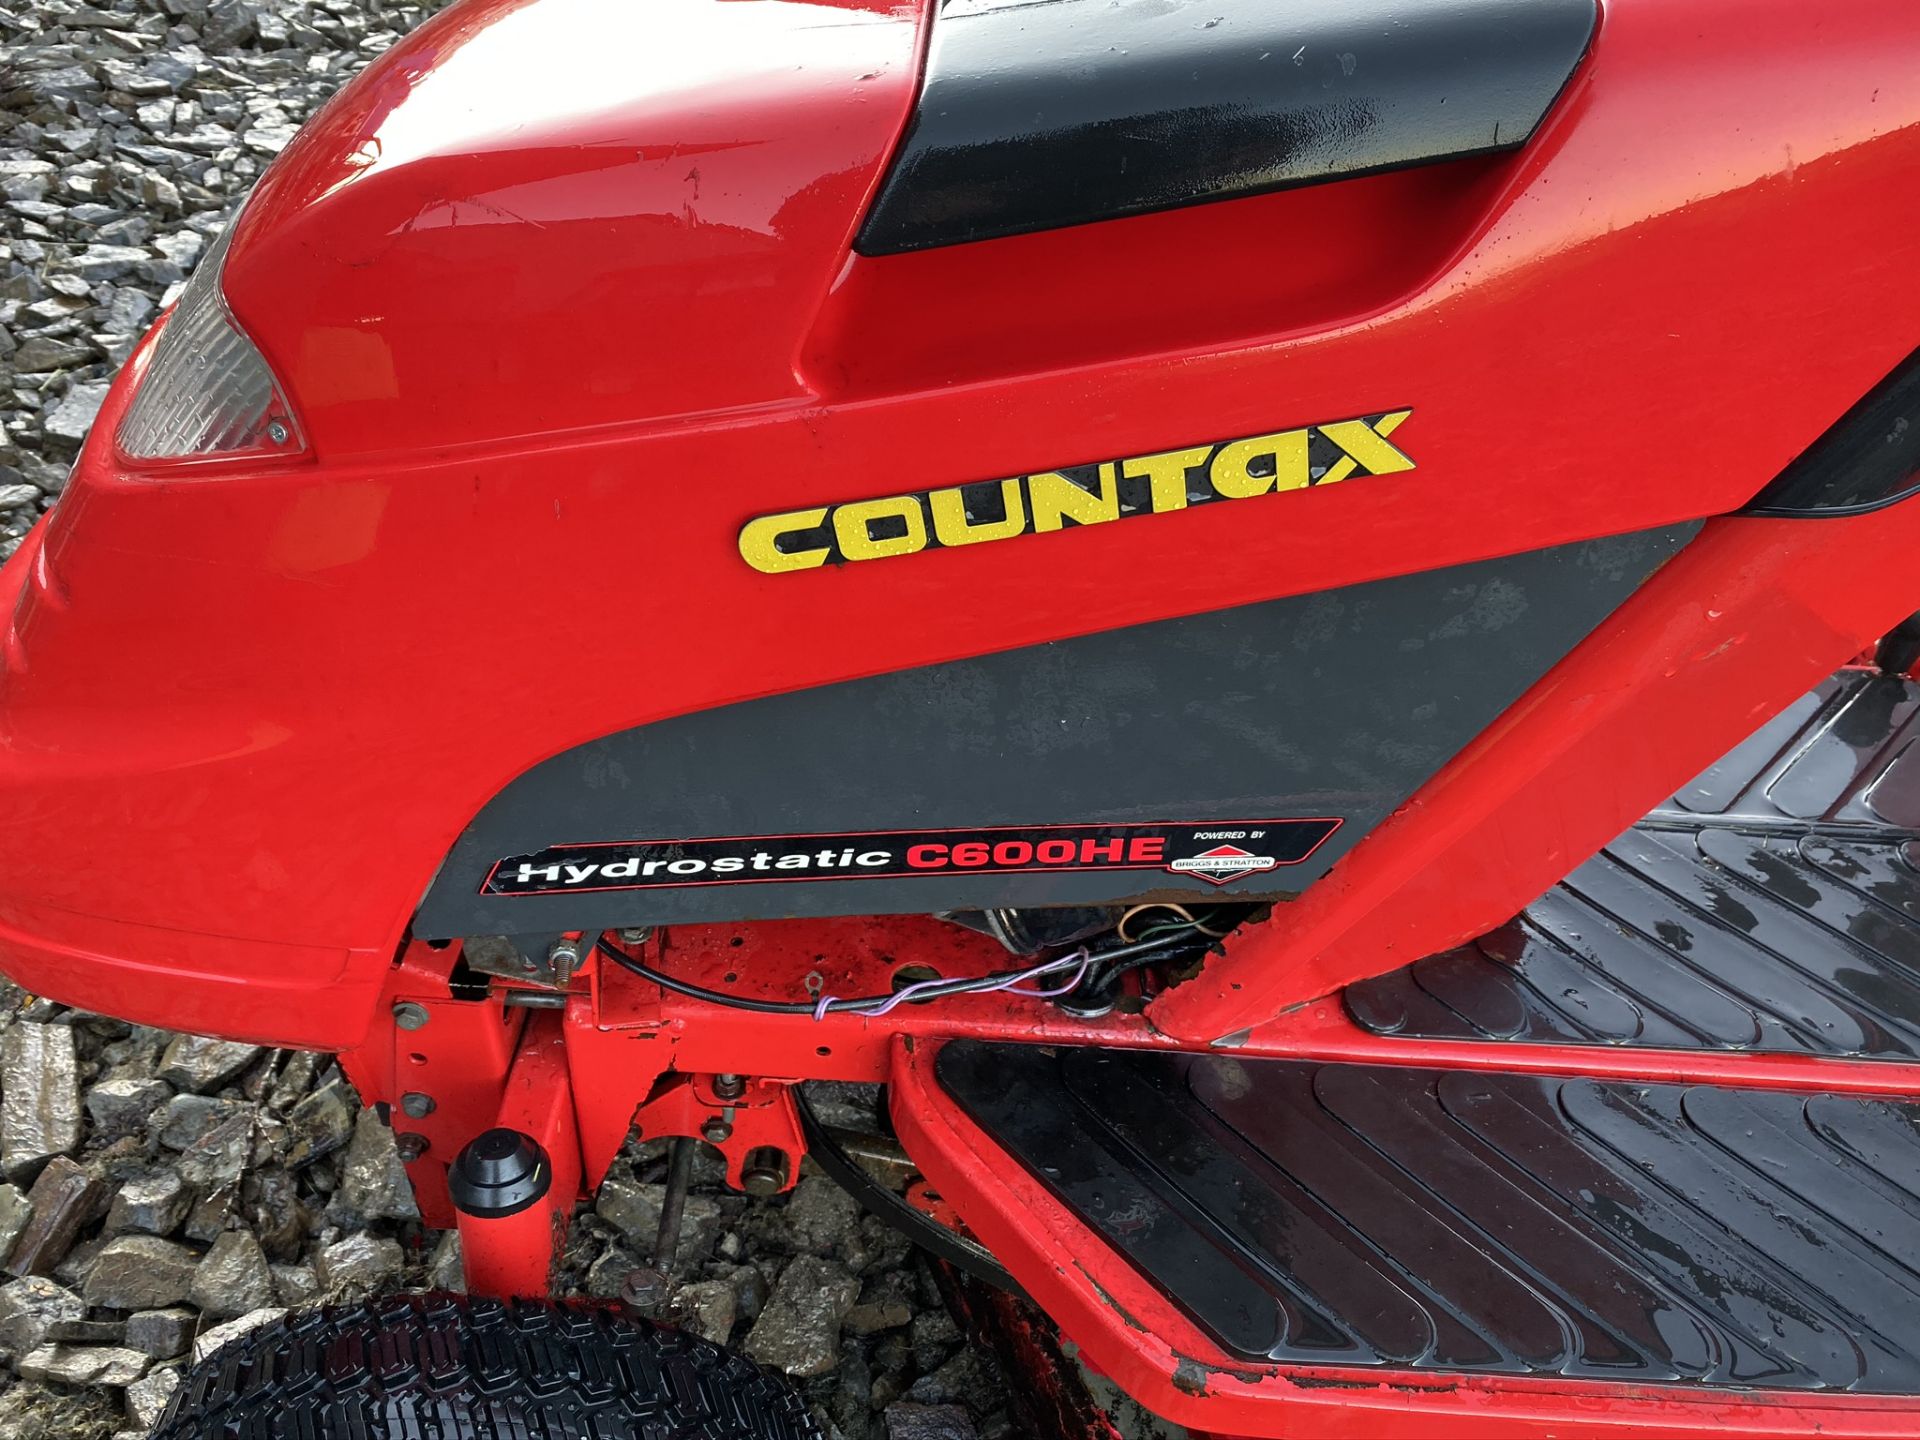 COUNTAX C600HE RIDE ON MOWER - Image 7 of 8